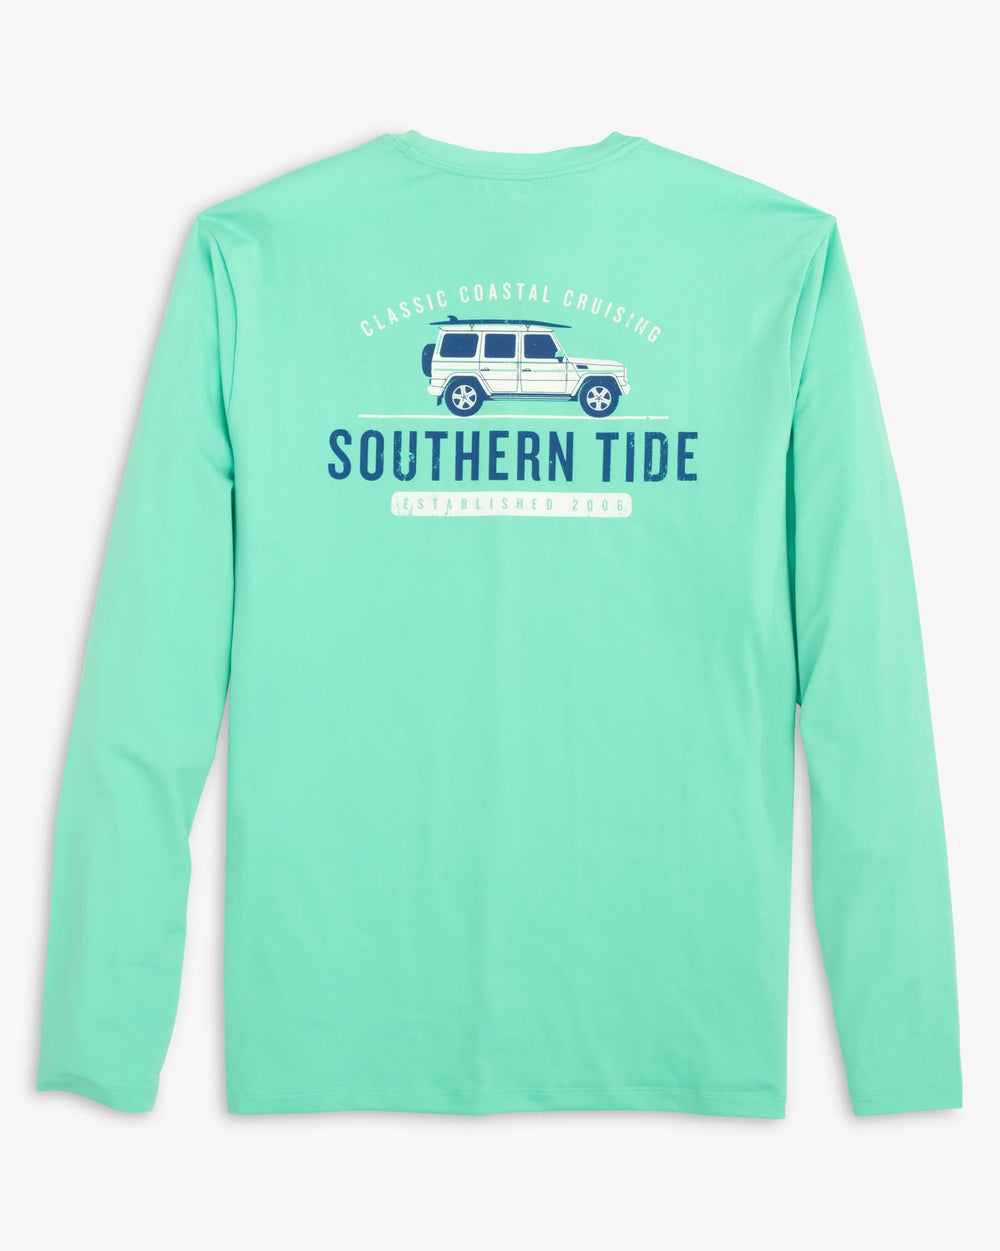 The back view of the Southern Tide Classic Cruising Long Sleeve Performance T-Shirt by Southern Tide - Mint